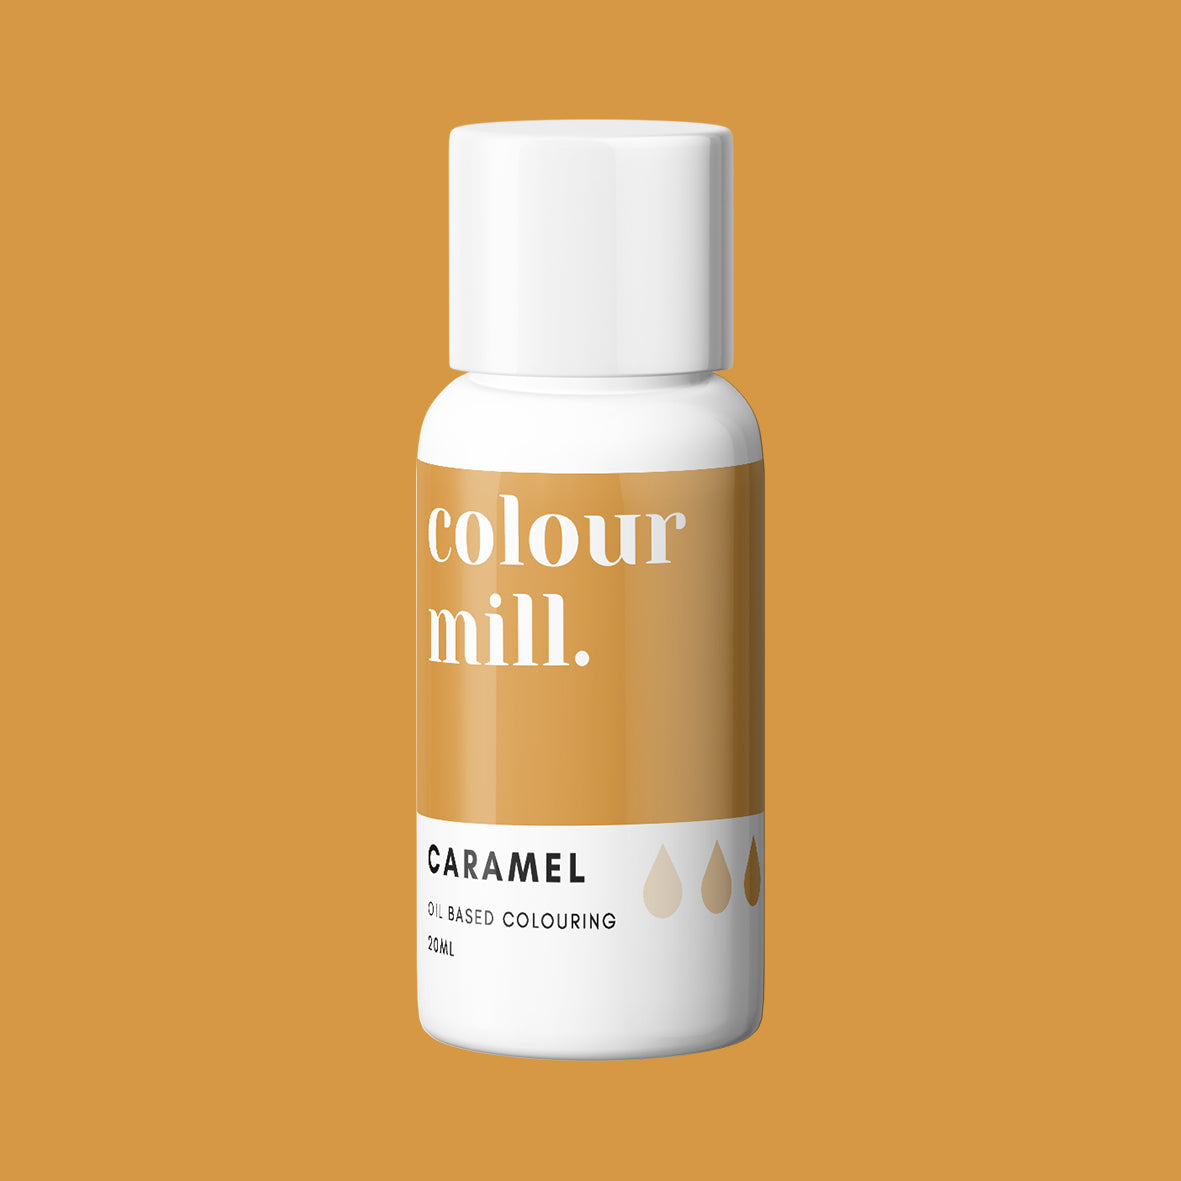 CARAMEL oil based concentrated icing colouring 20ml